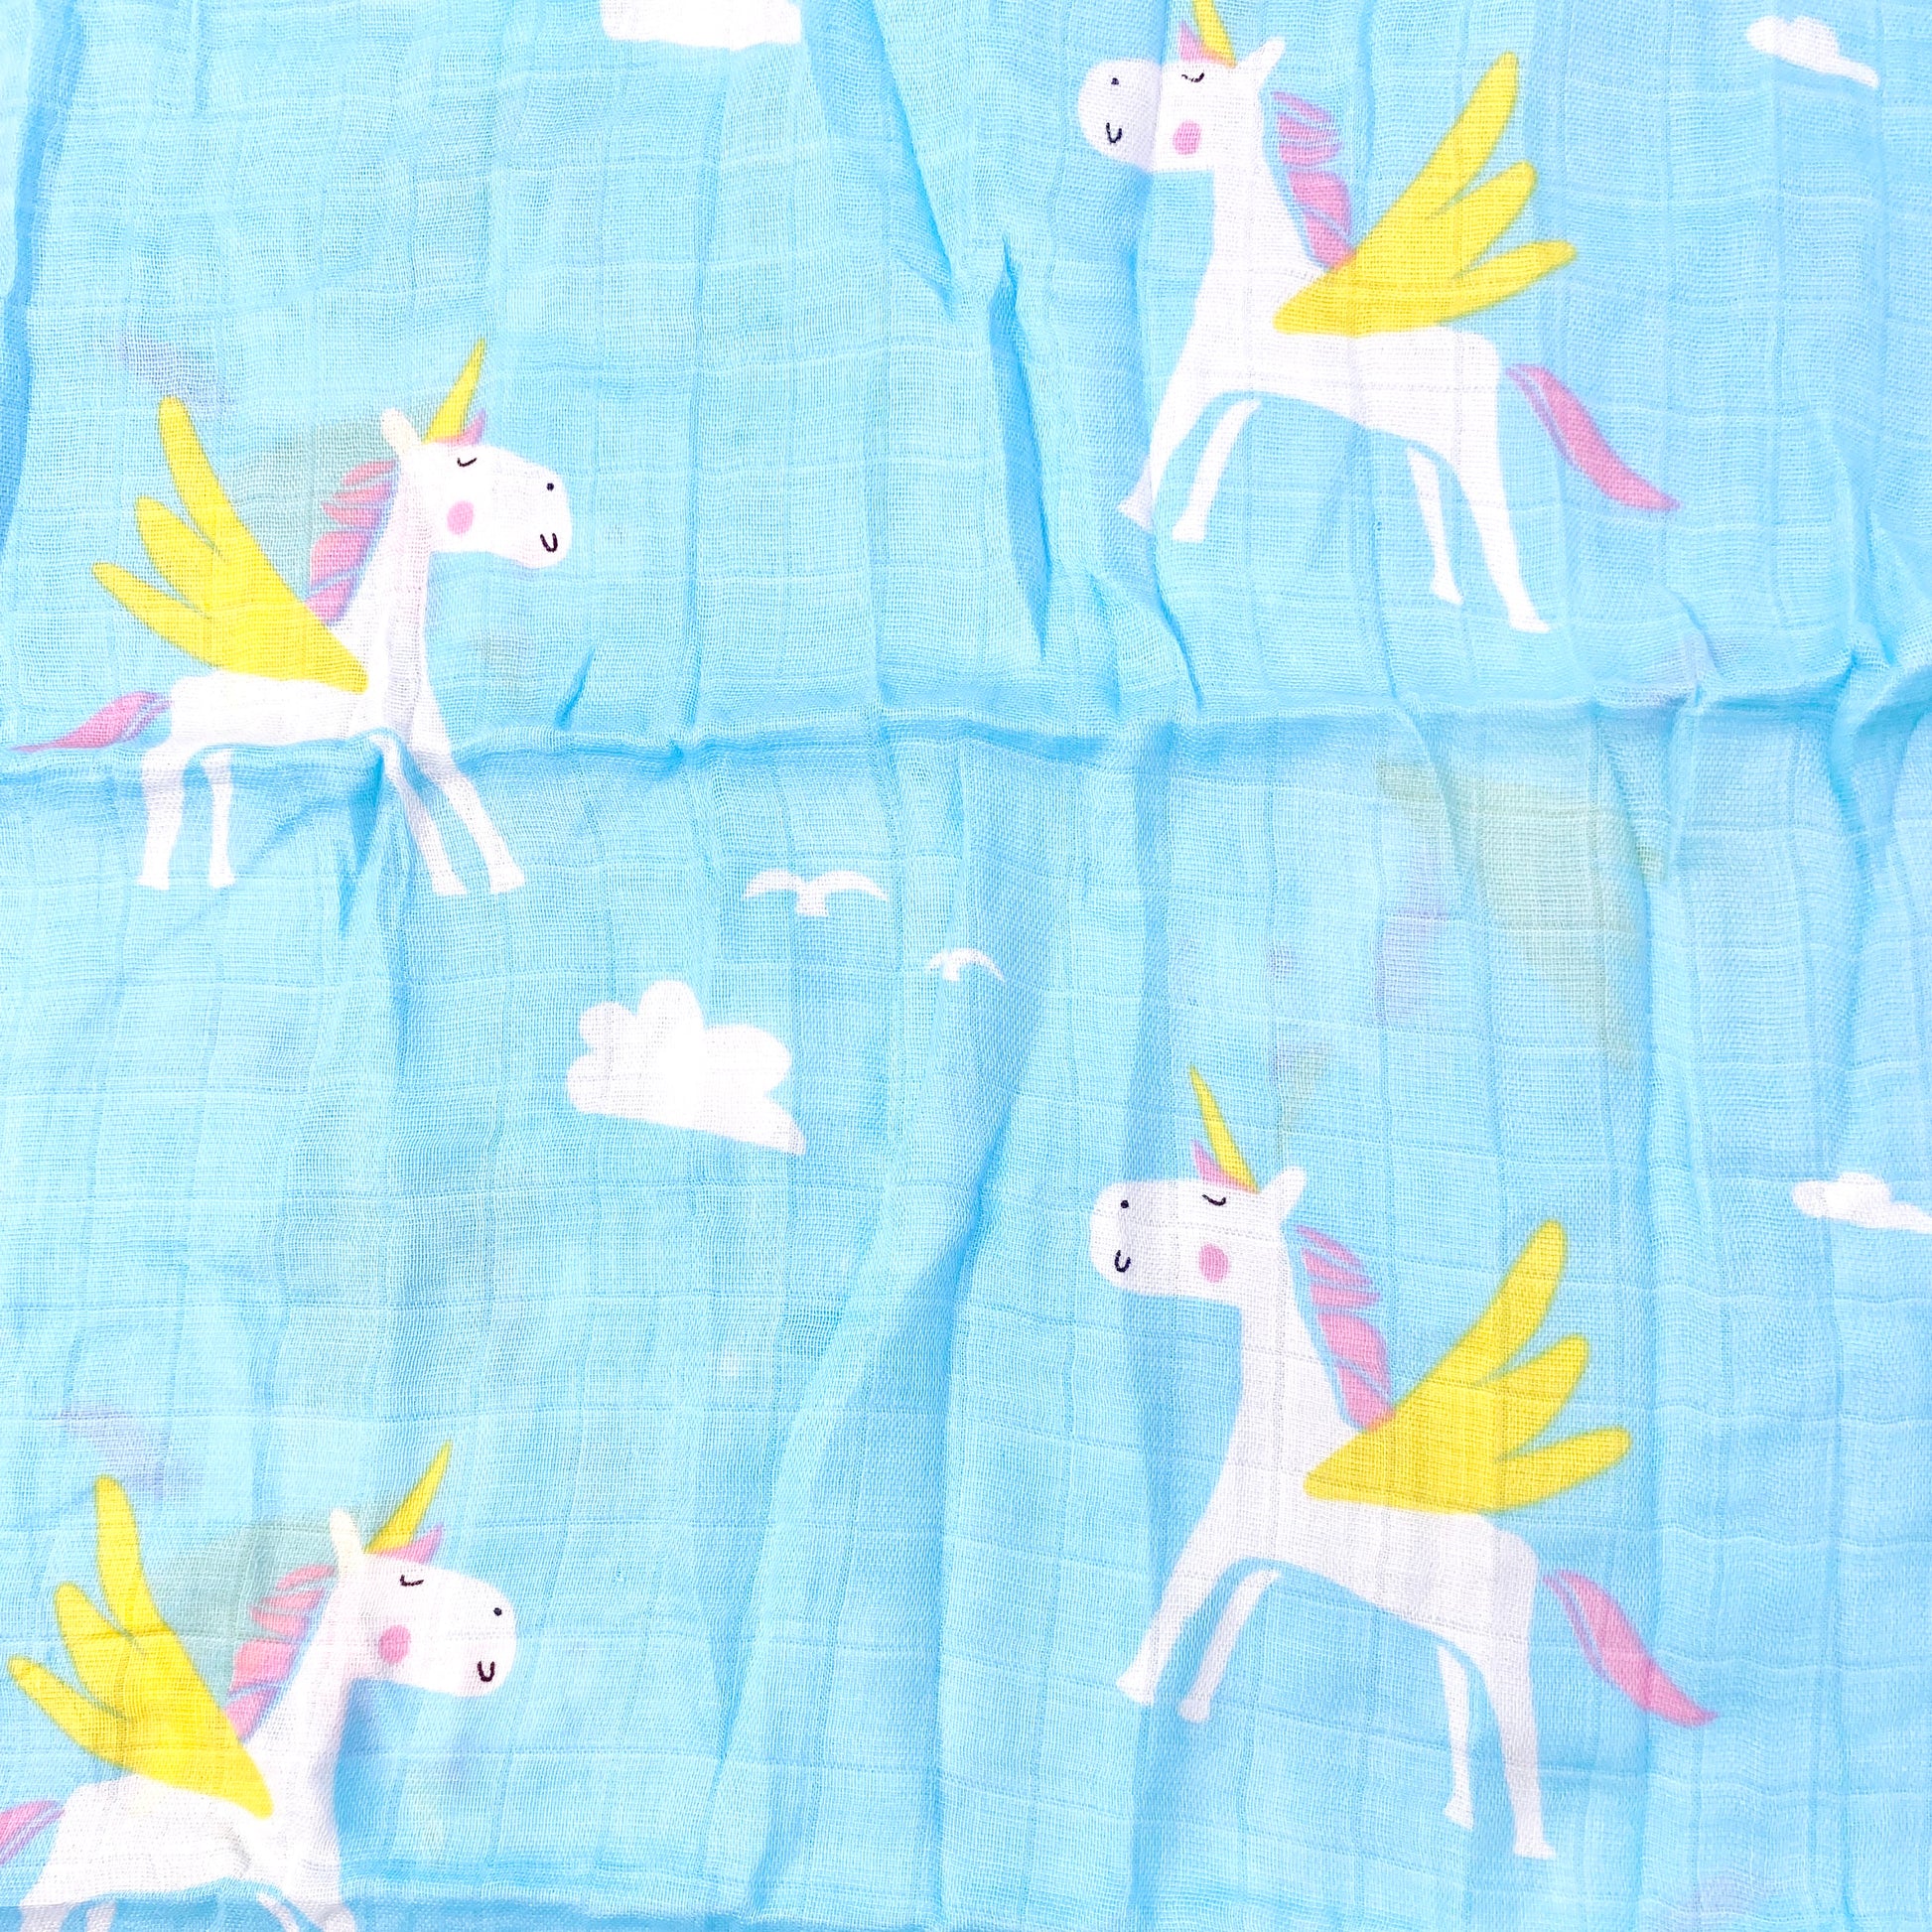 Close up pattern of a blue muslin swaddle blanket with a unicorn design.